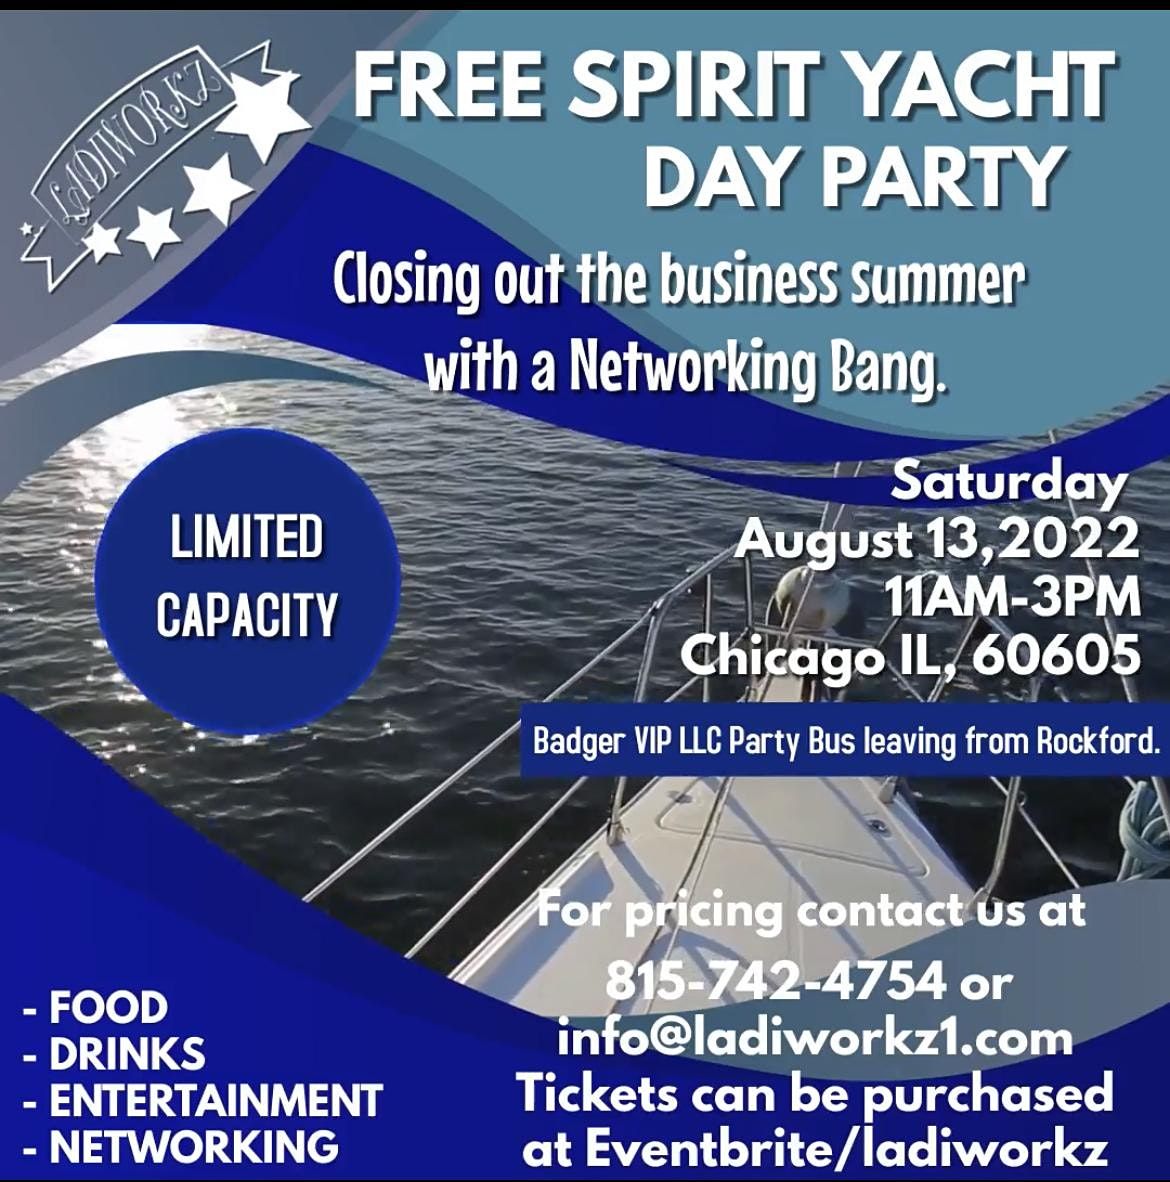 FREE SPIRIT YACHT DAY PARTY. Closing out the business summer with a Network